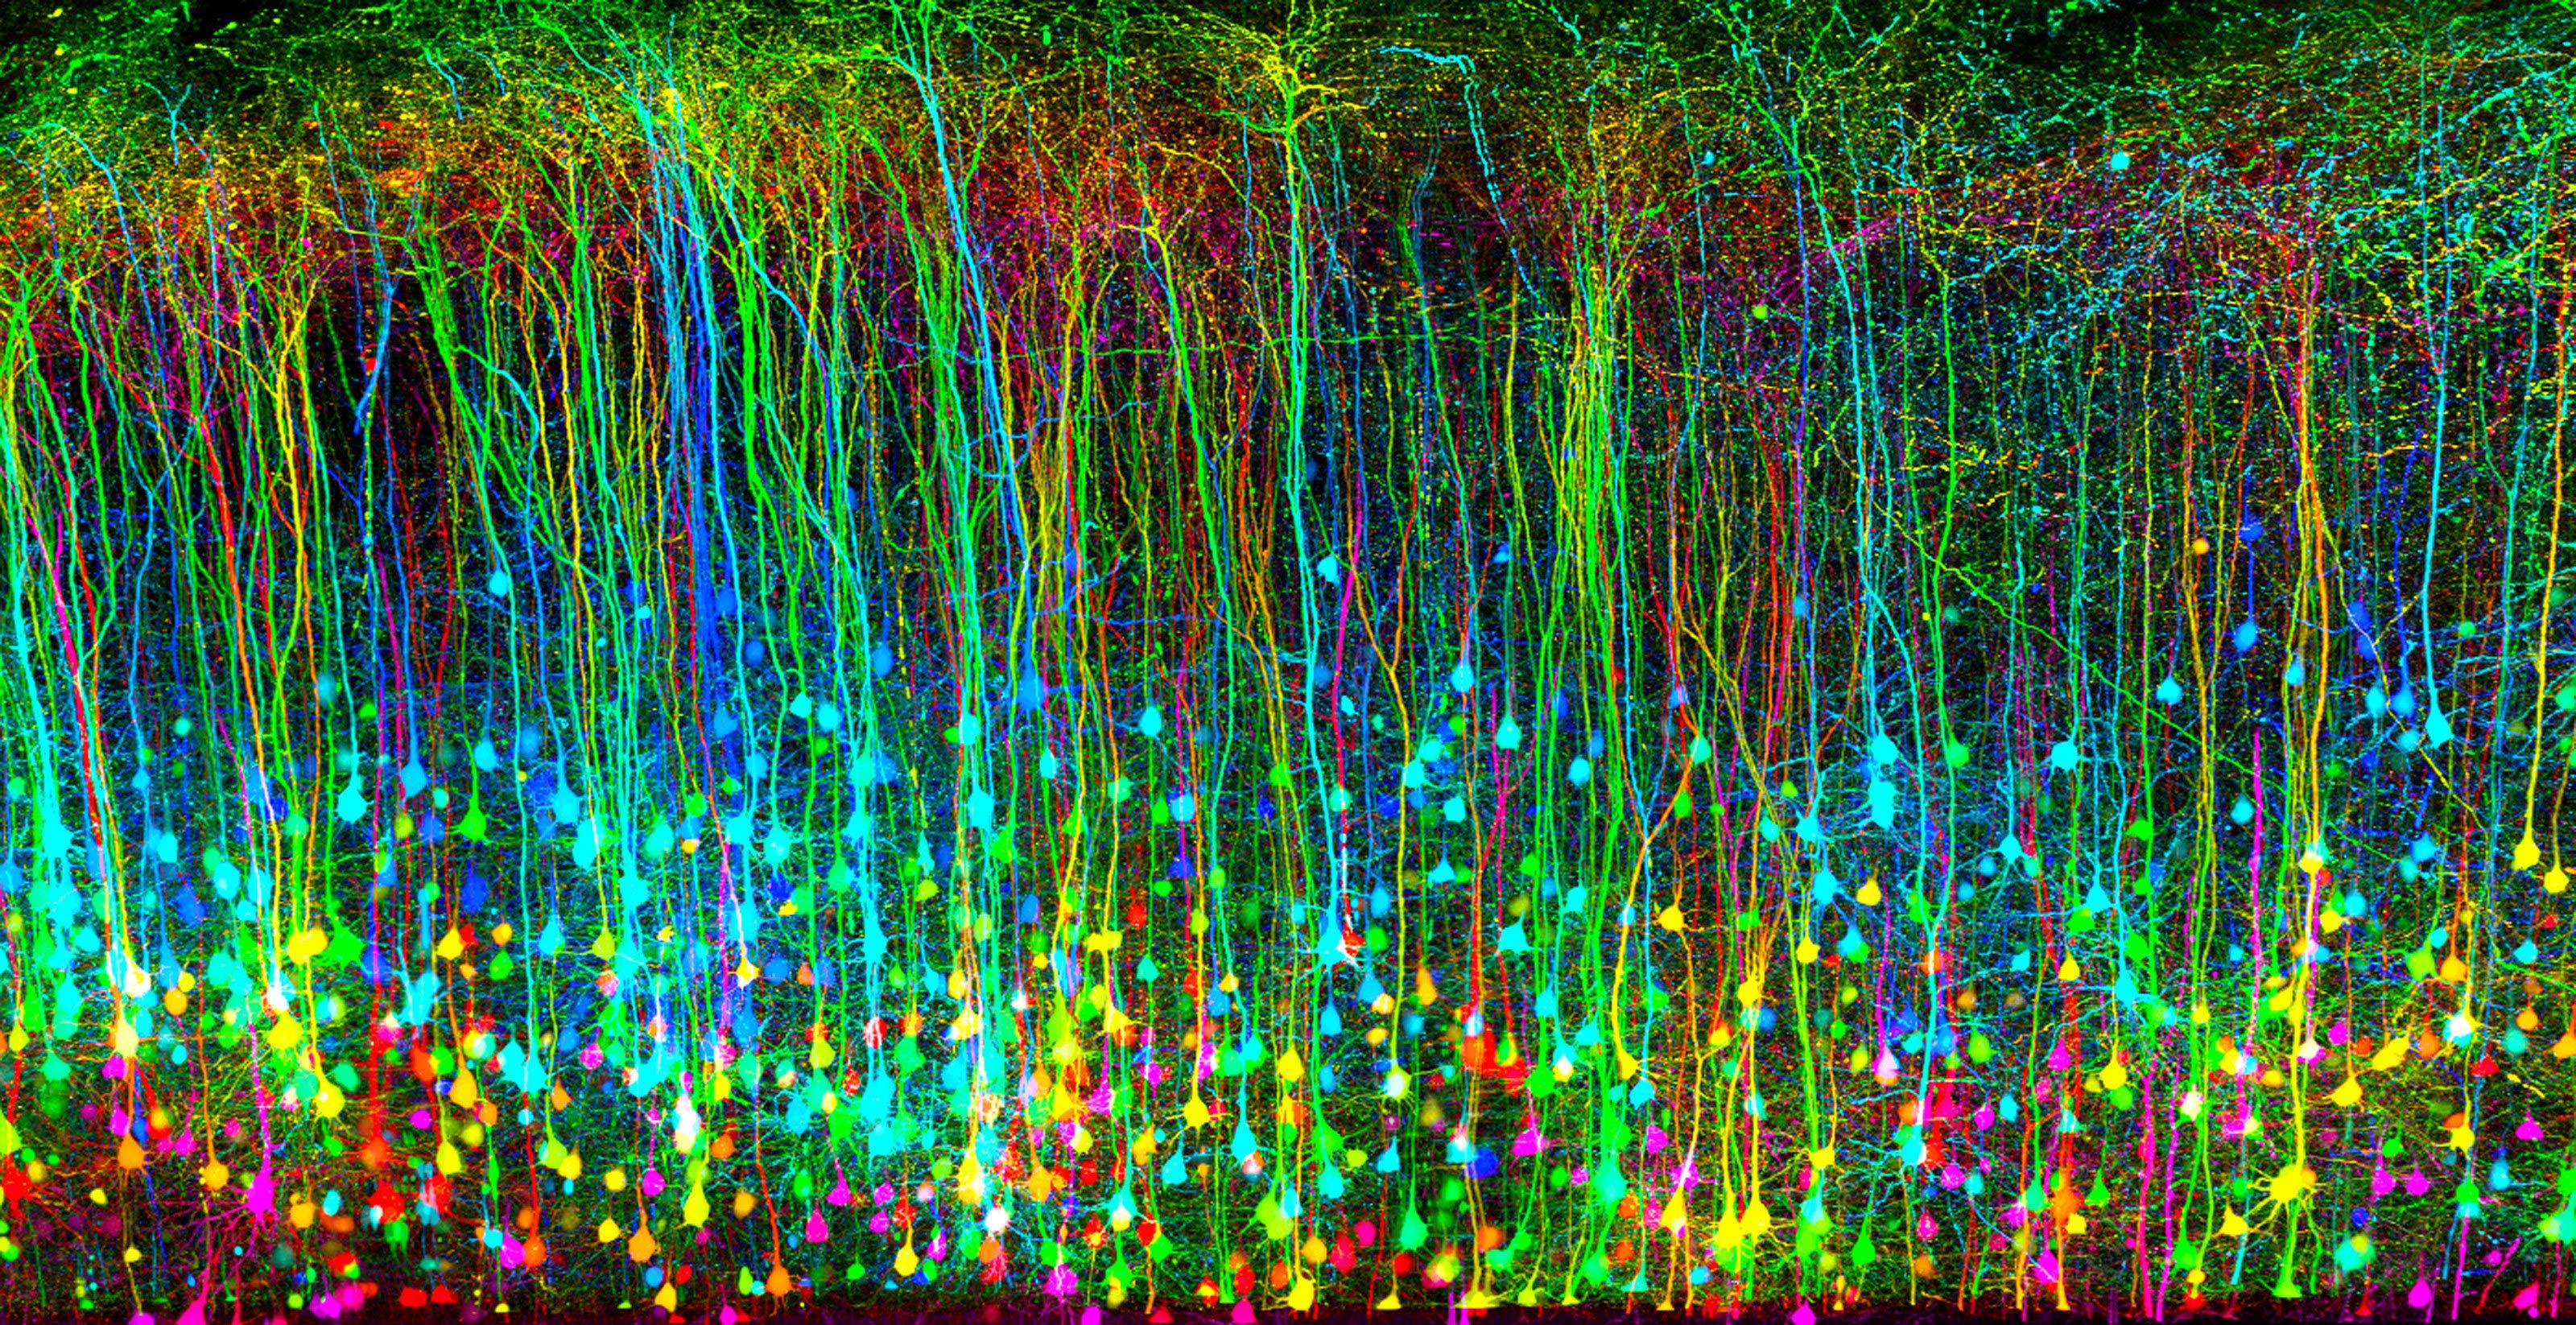 Head trauma in a mouse seen under a microscope.  It forms hundreds of filaments "drooping" in bright, fluorescent colors.